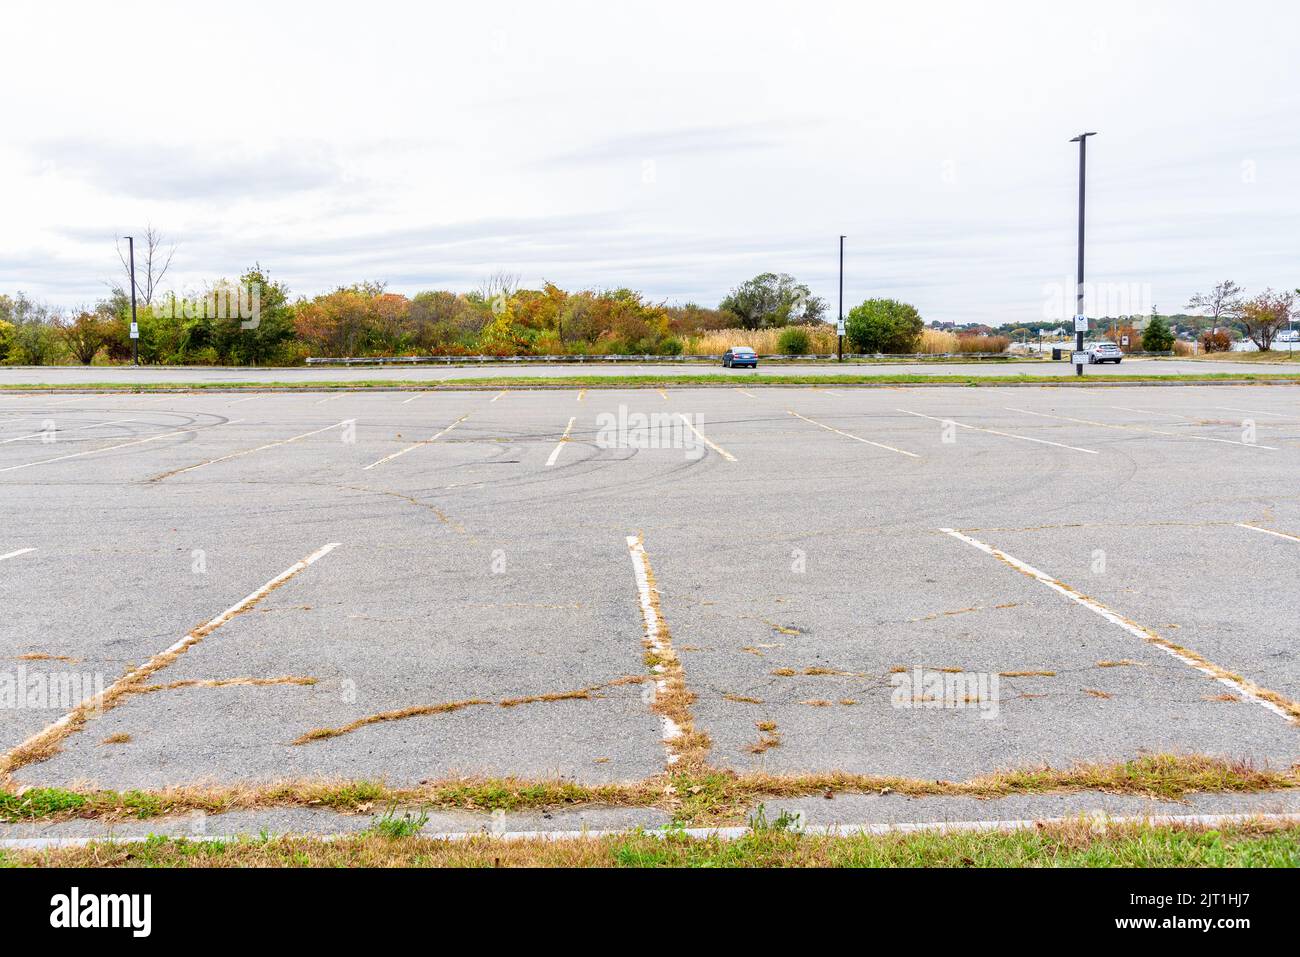 Old almost empty parking lot under cloudy sky in autumn Stock Photo